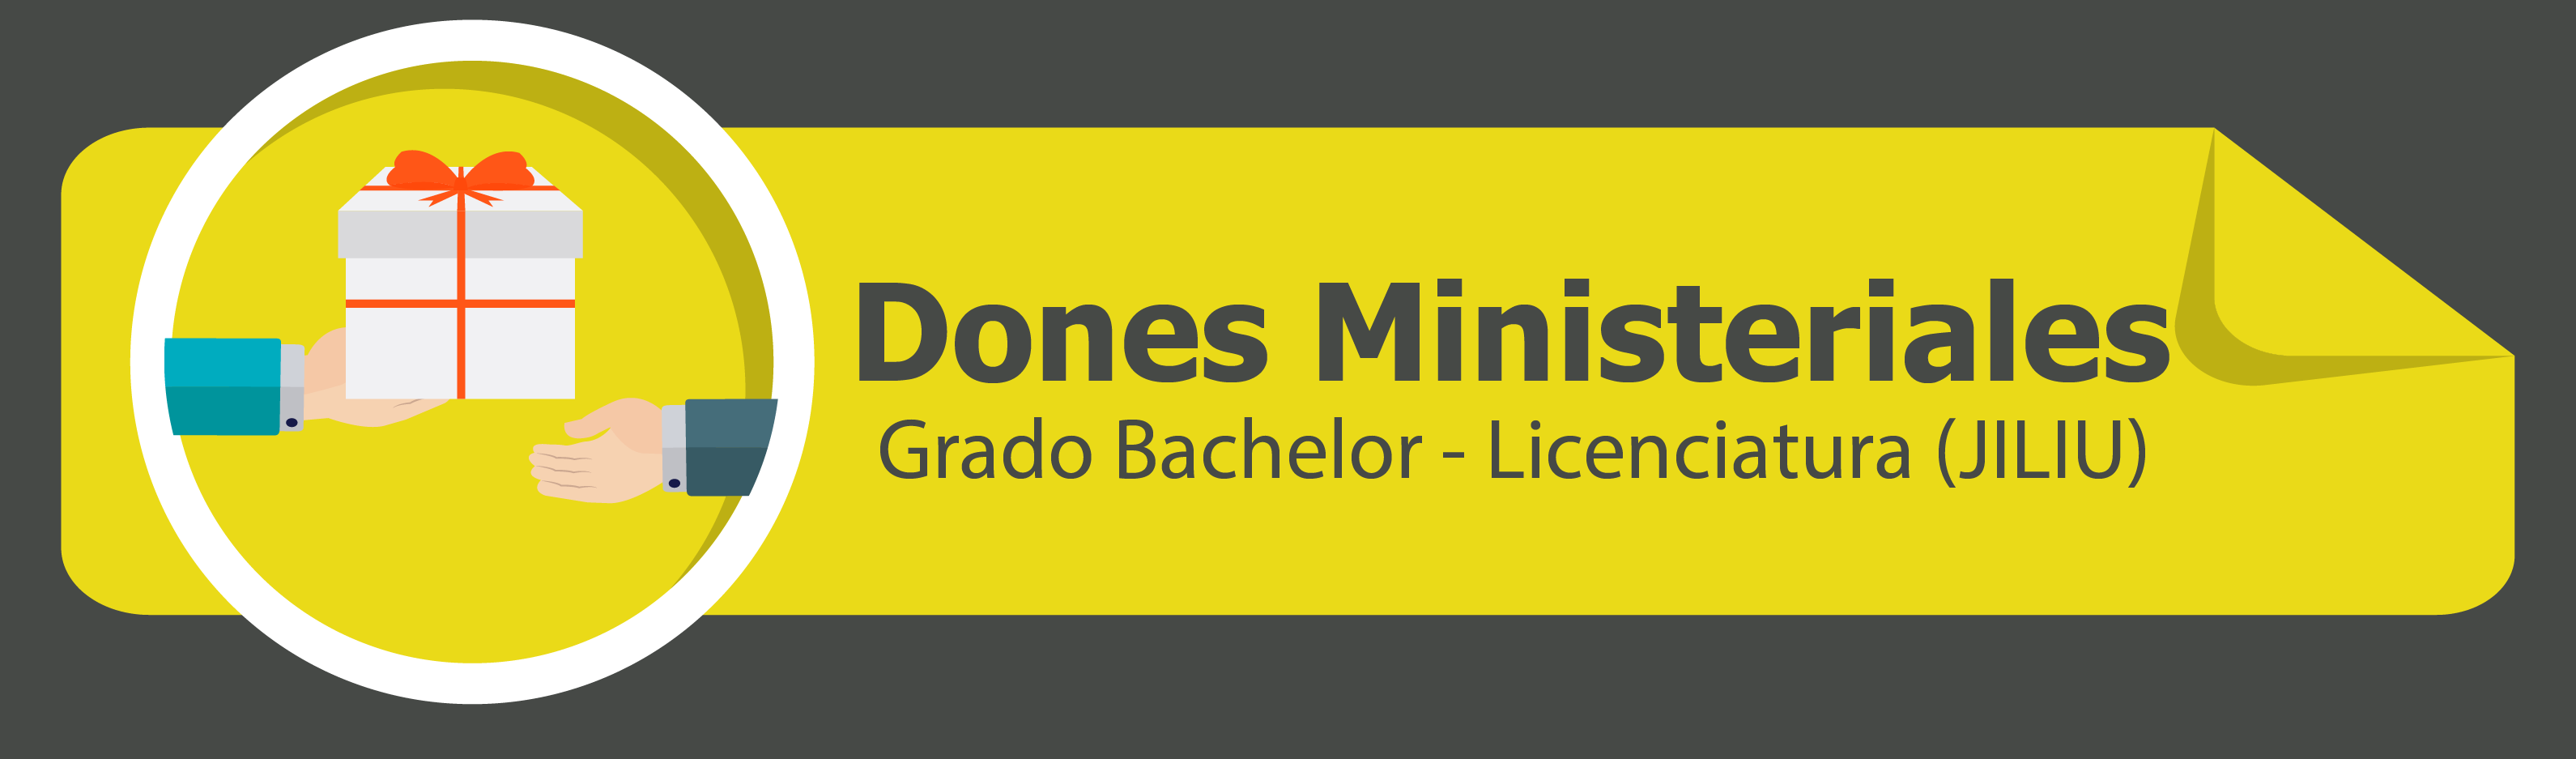 Dones Ministeriales